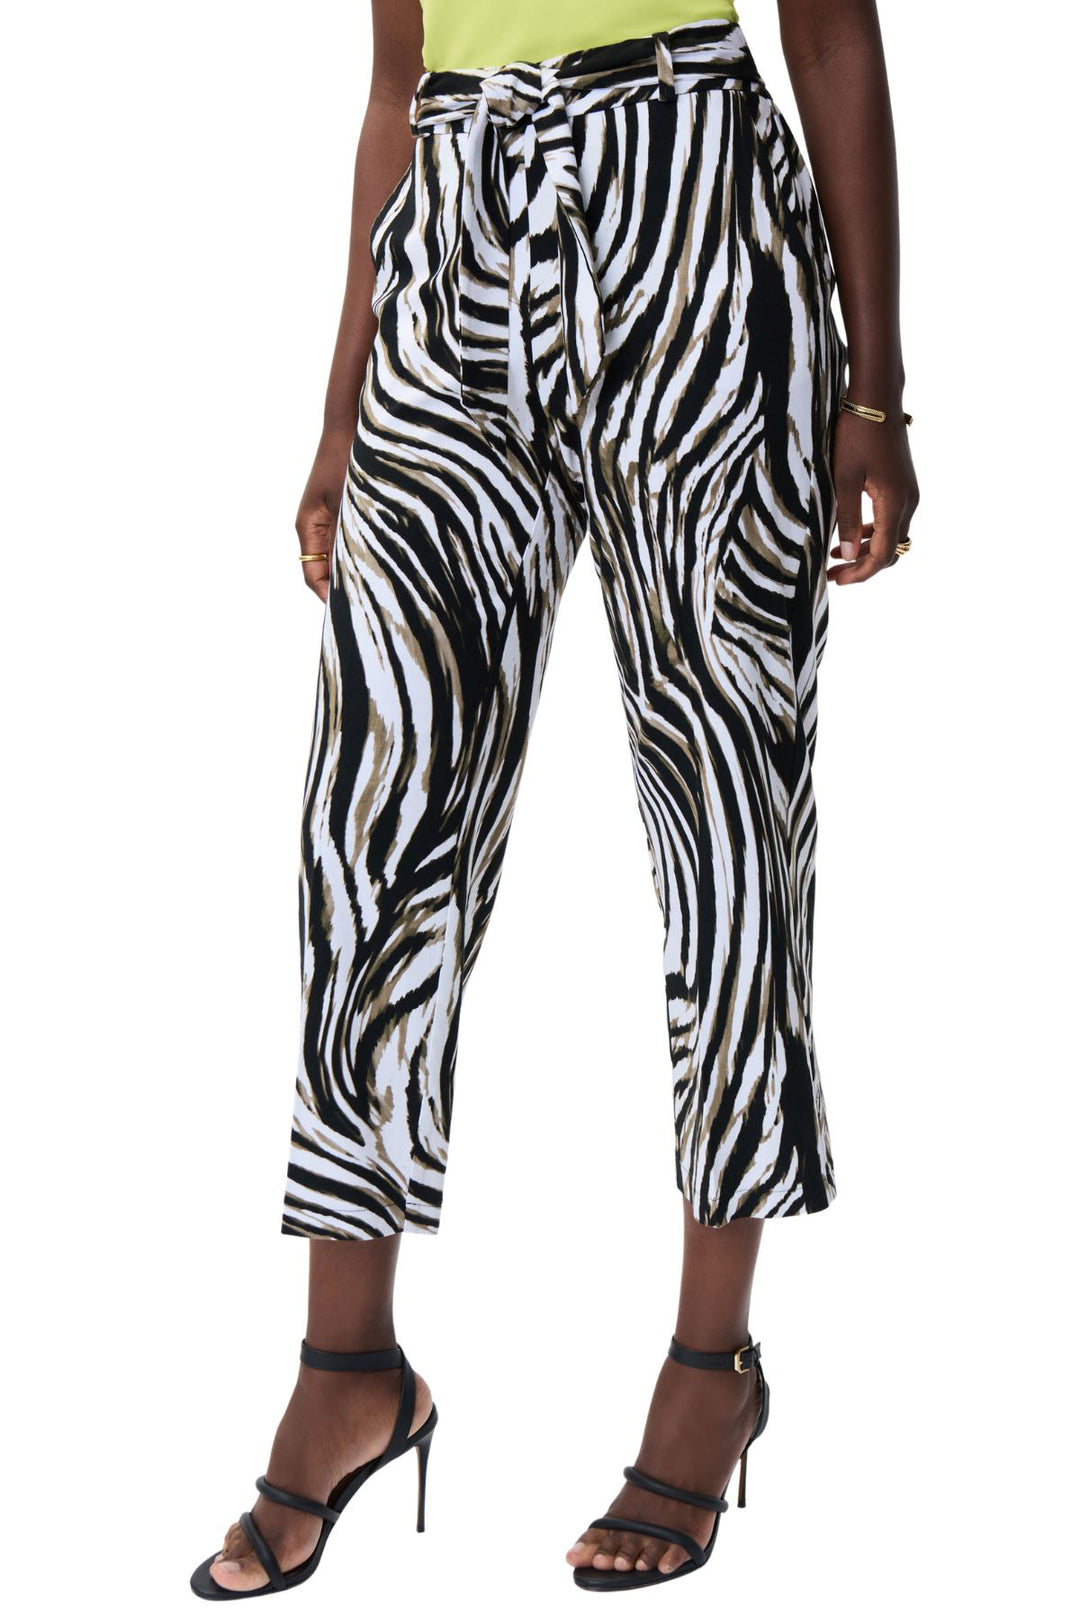  Animal print wide leg pants by Joseph Ribkoff, sold and shipped from Pizazz Boutique Nelson Bay women's dresses online Australia front view